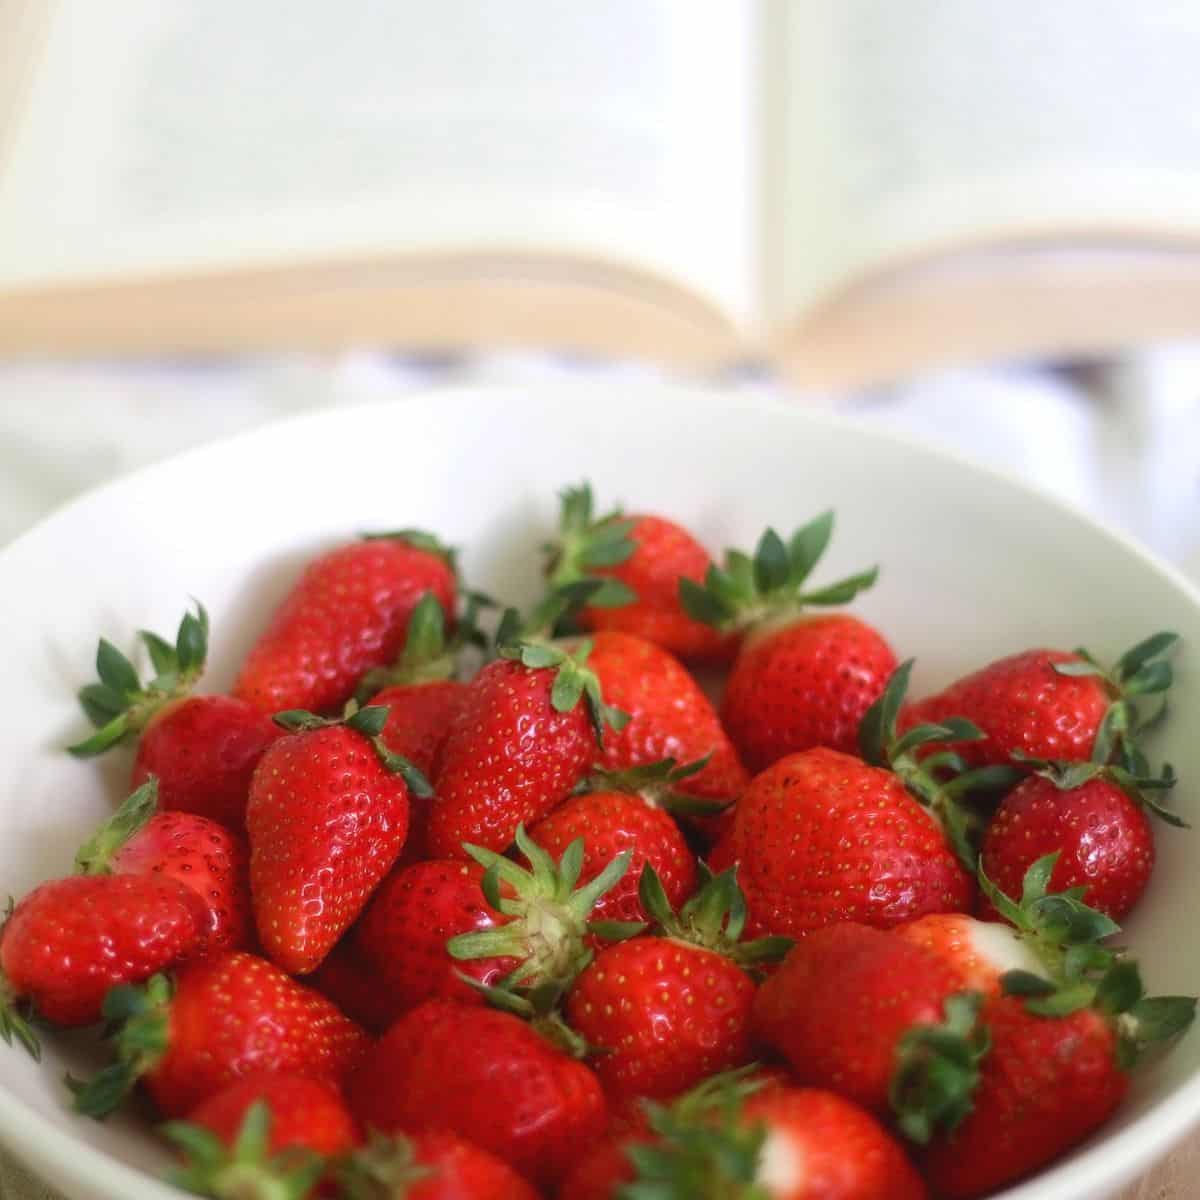 starberries in a bowl with a book open in the back